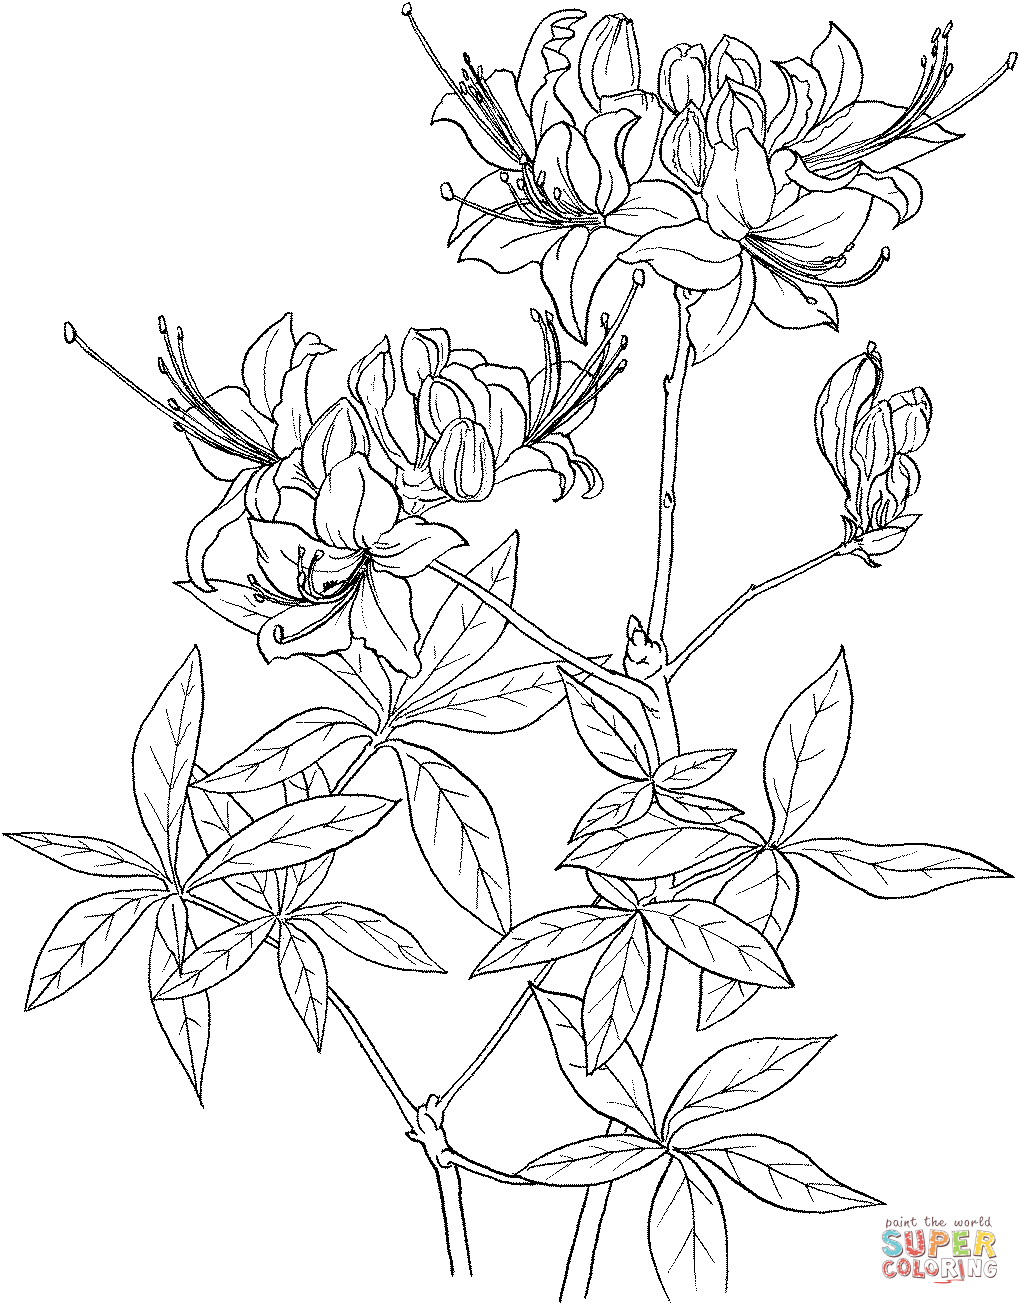 Rhododendron Calendulaceum Or Flame Azalea Coloring Pages